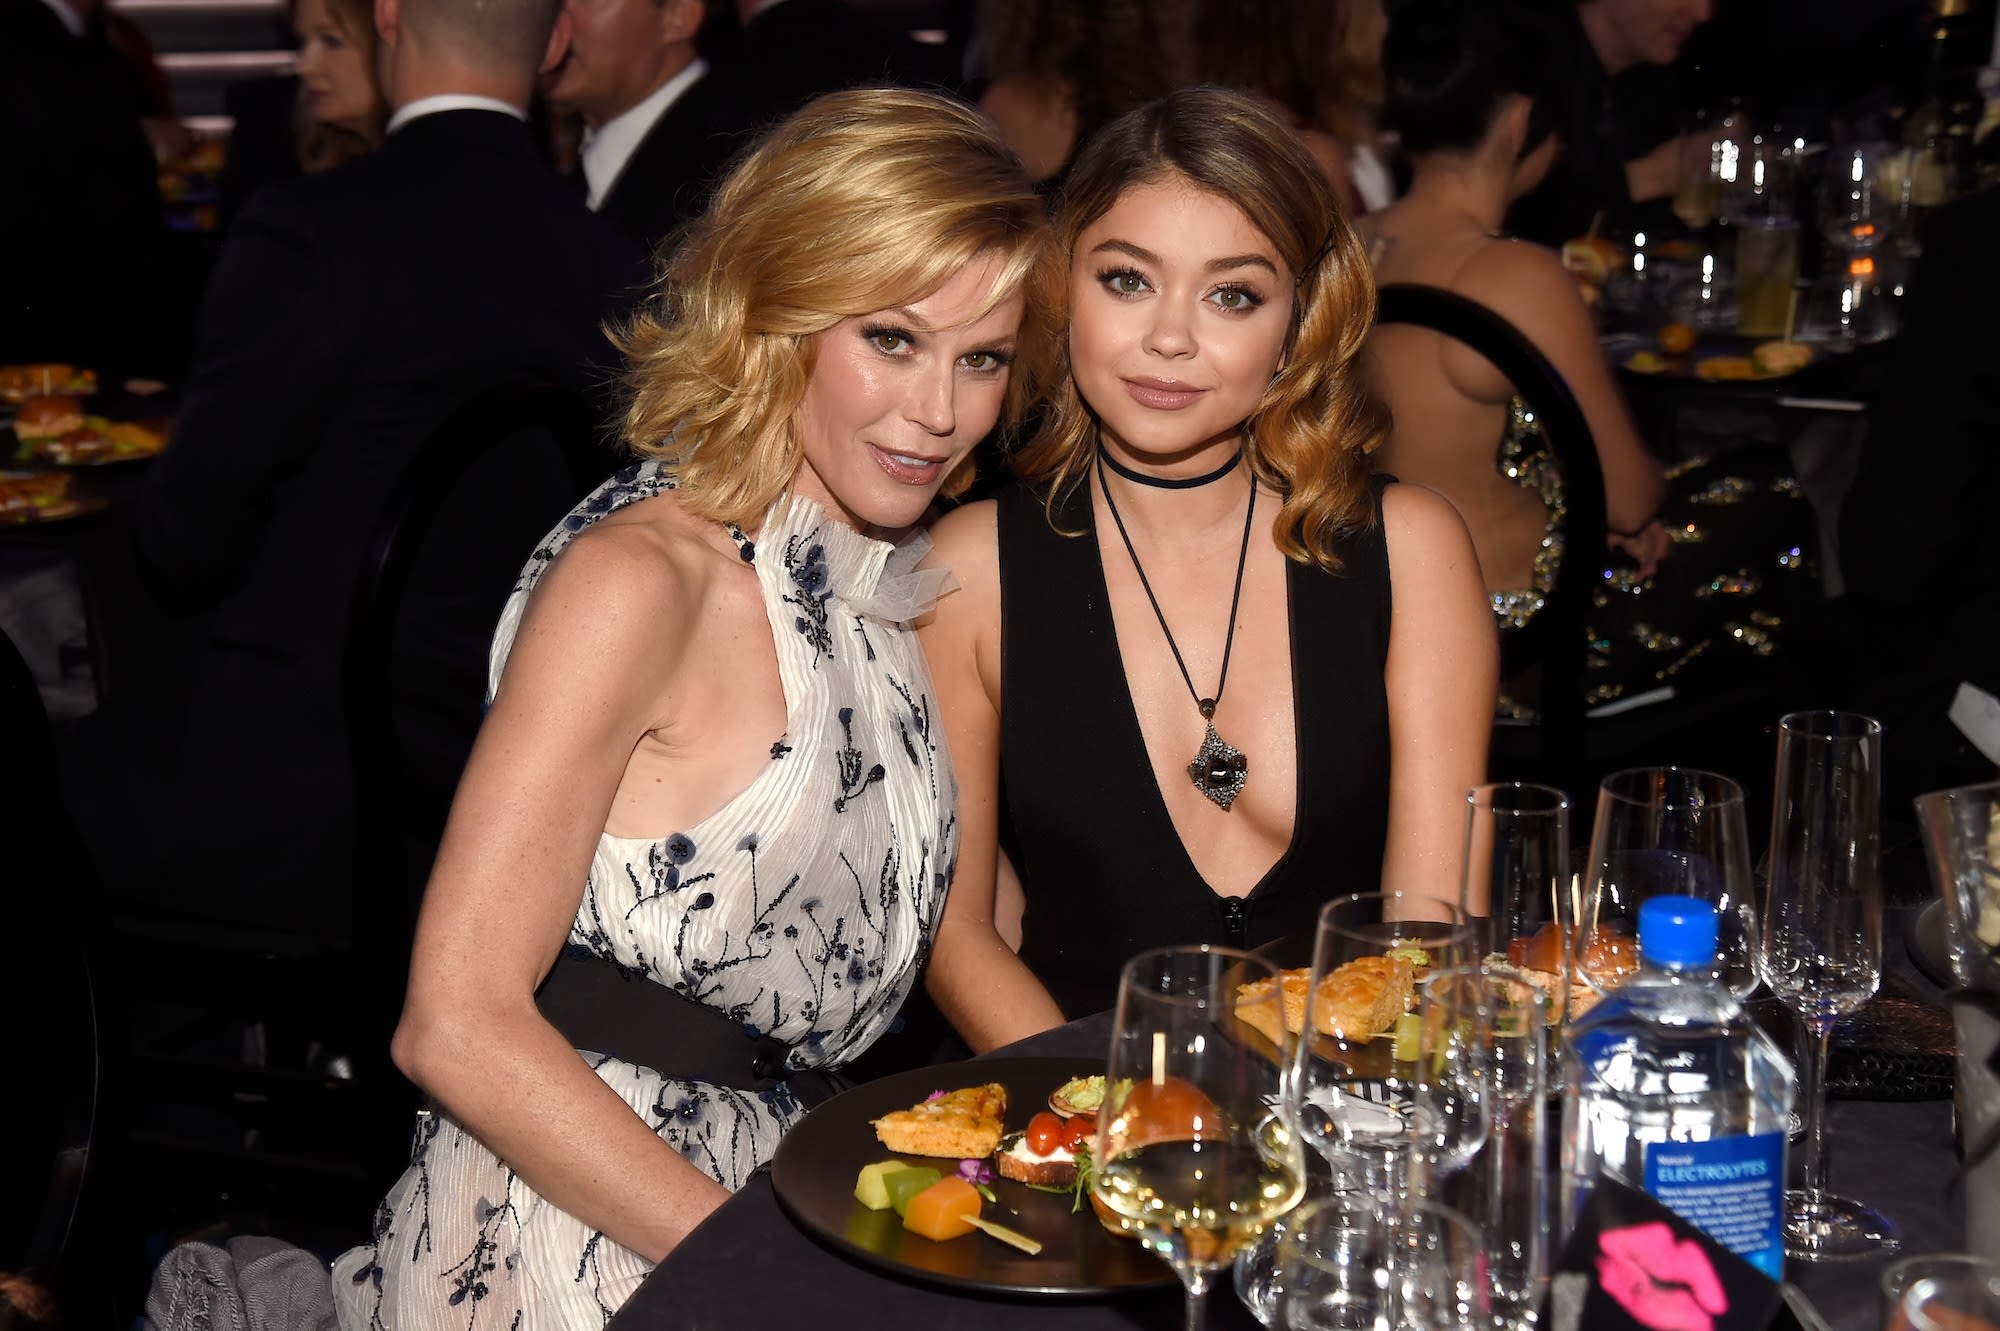 Julie Bowen Helped ‘Modern Family’ Costar Sarah Hyland Get Out of an Abusive Relationship